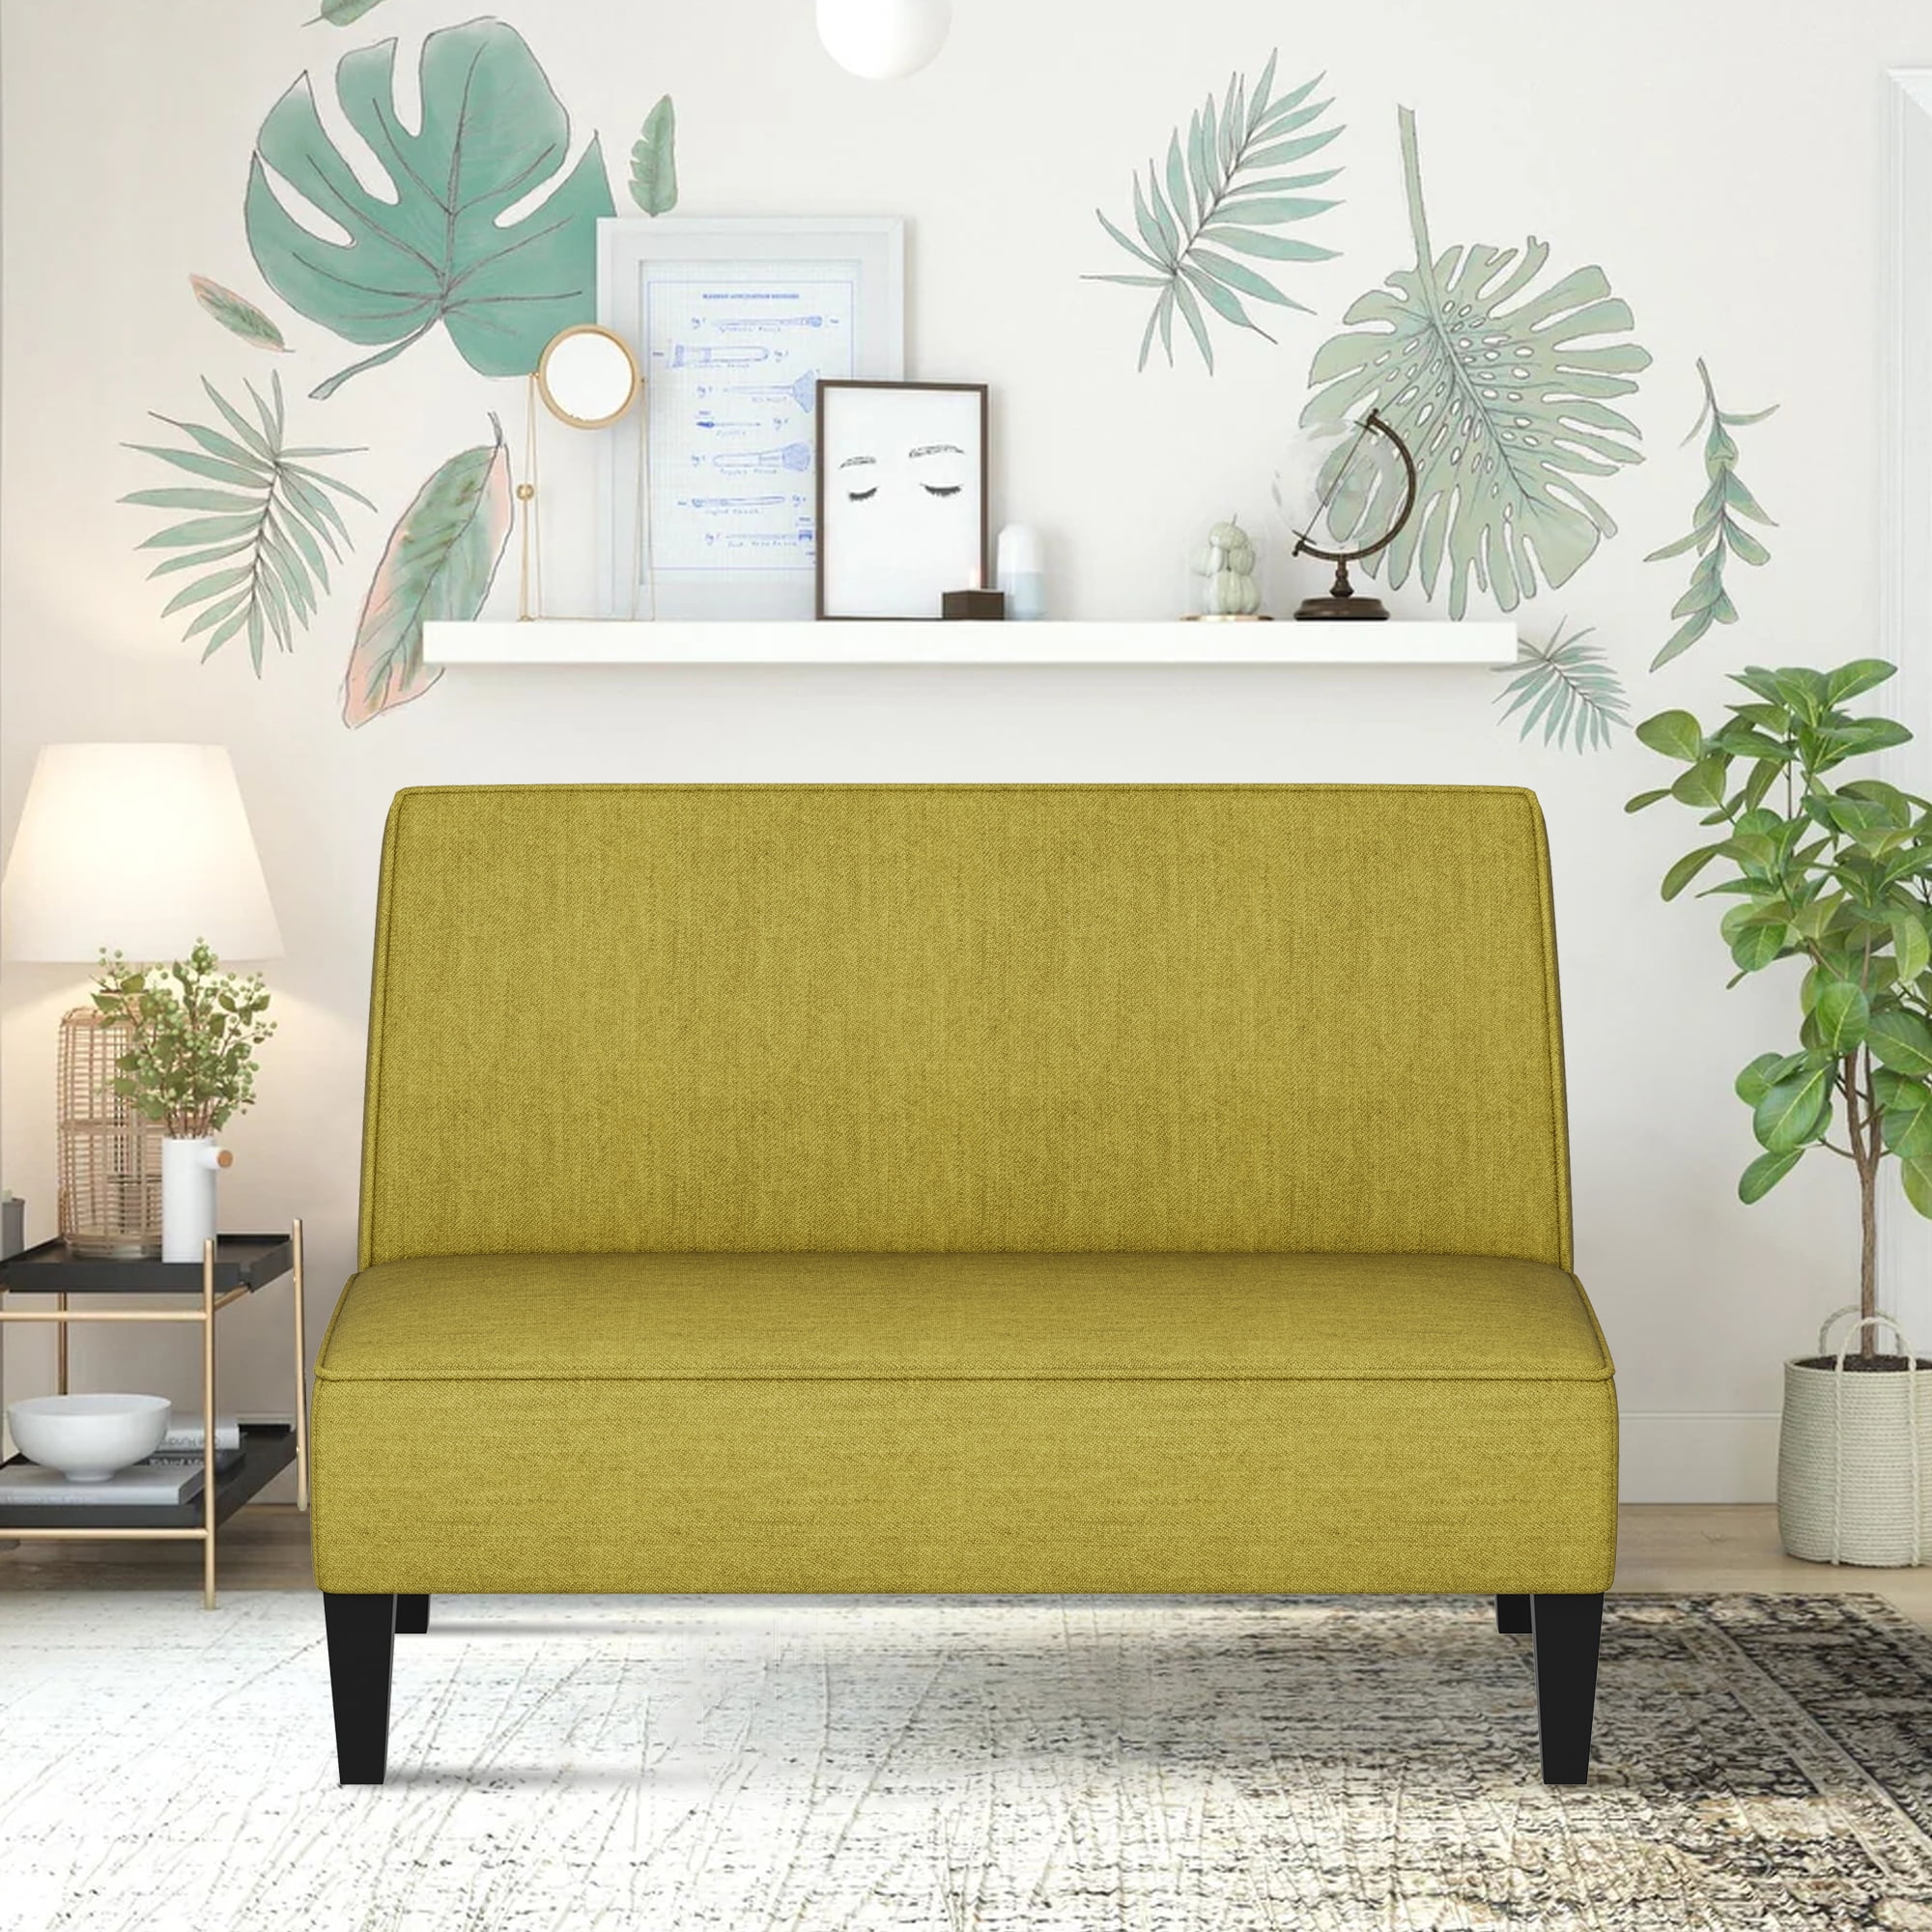 LOVE AND GREEN Couches ecolabellisees Taille 3 - 52 couches